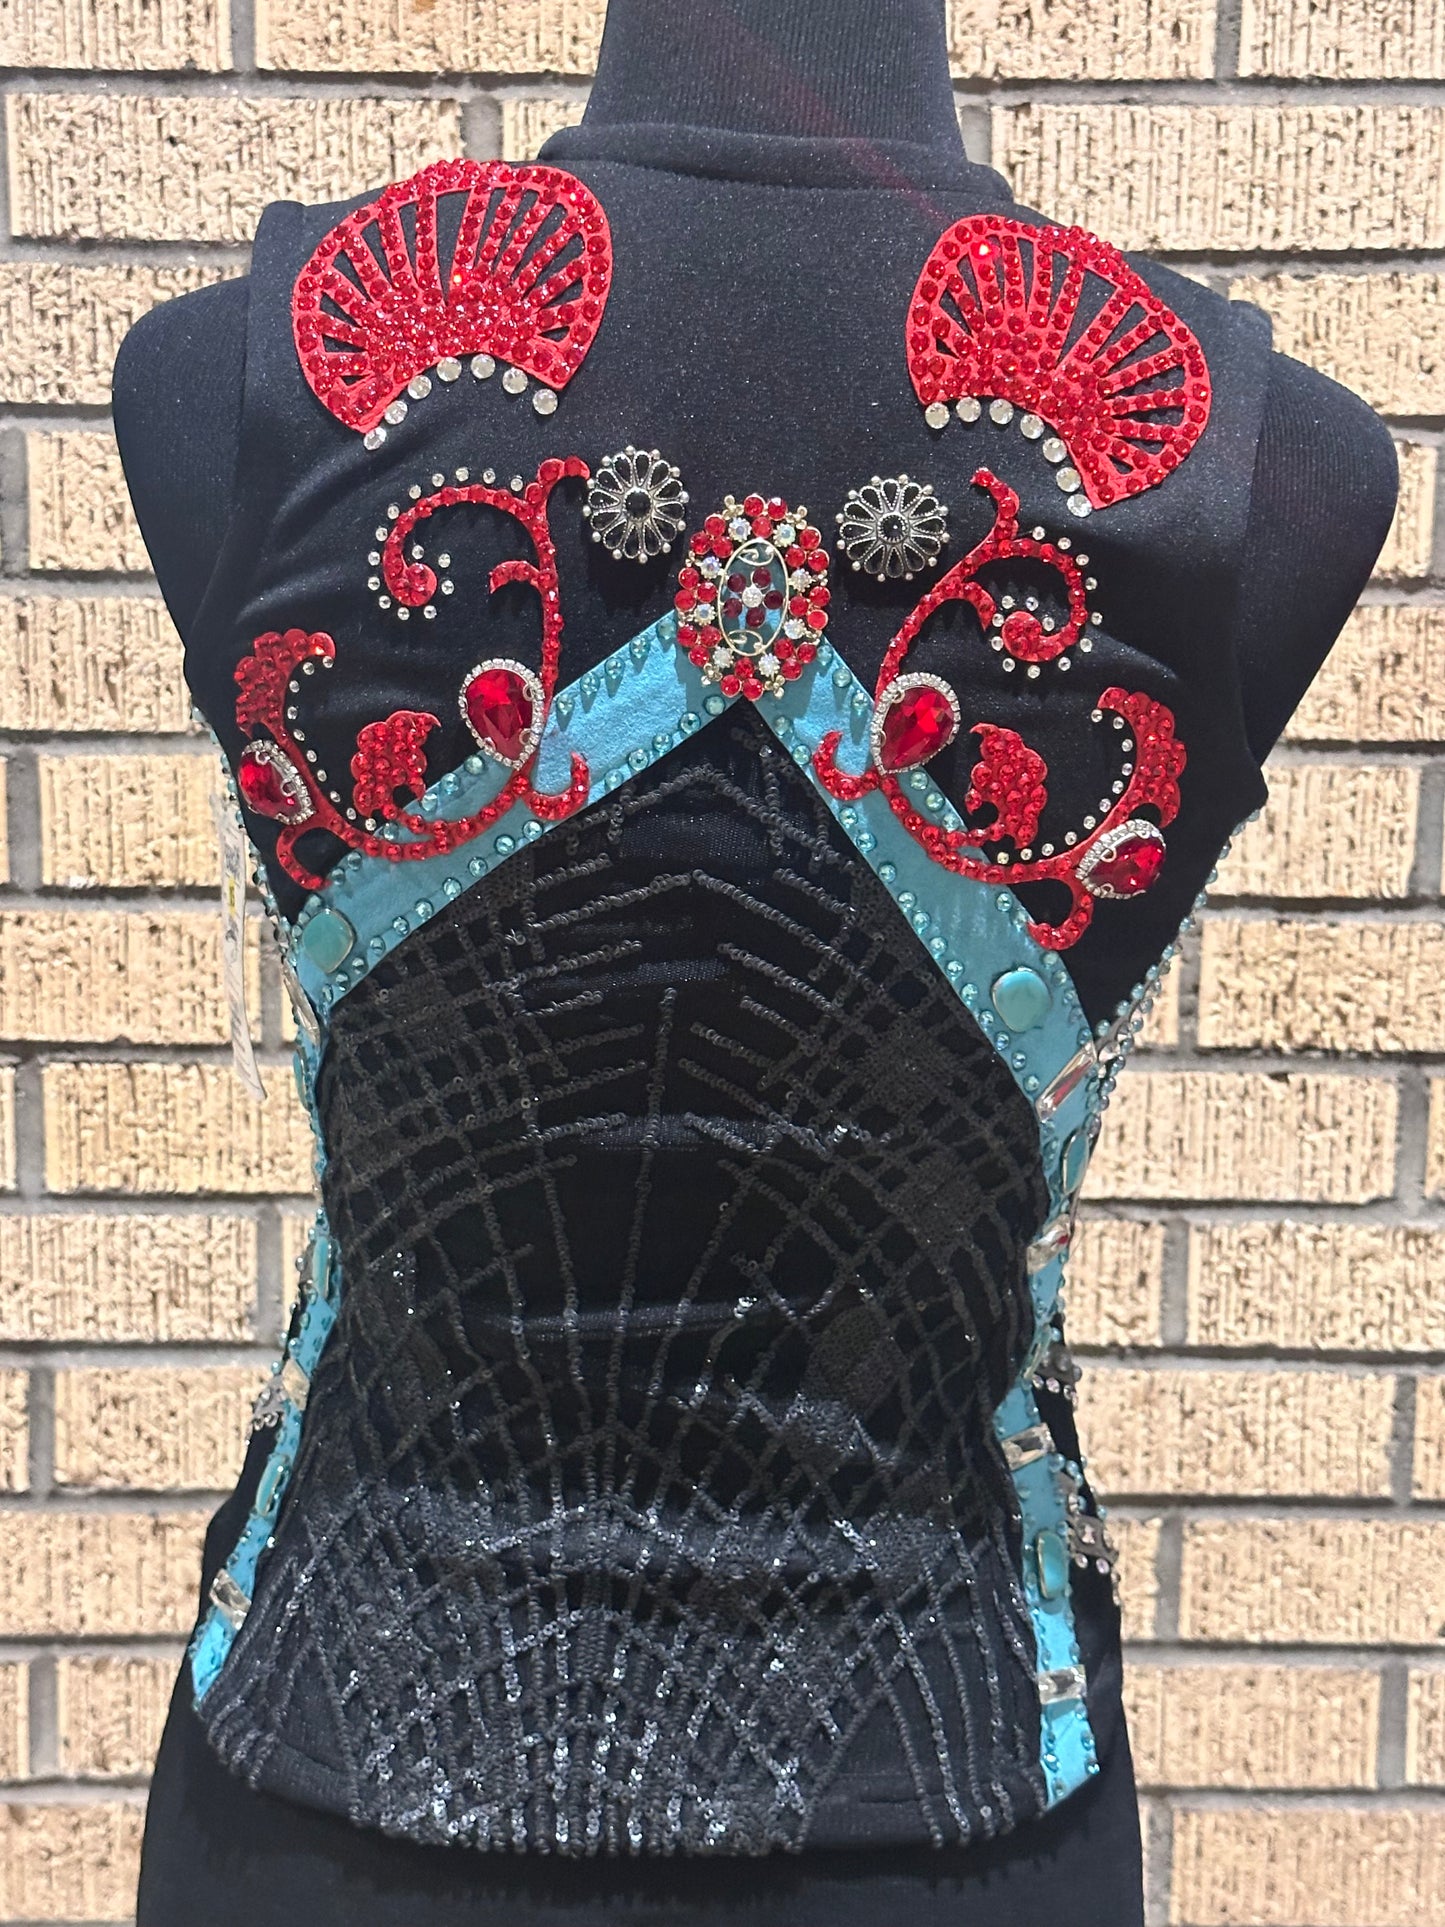 Extra Small Black vest with turquoise, grey and red design